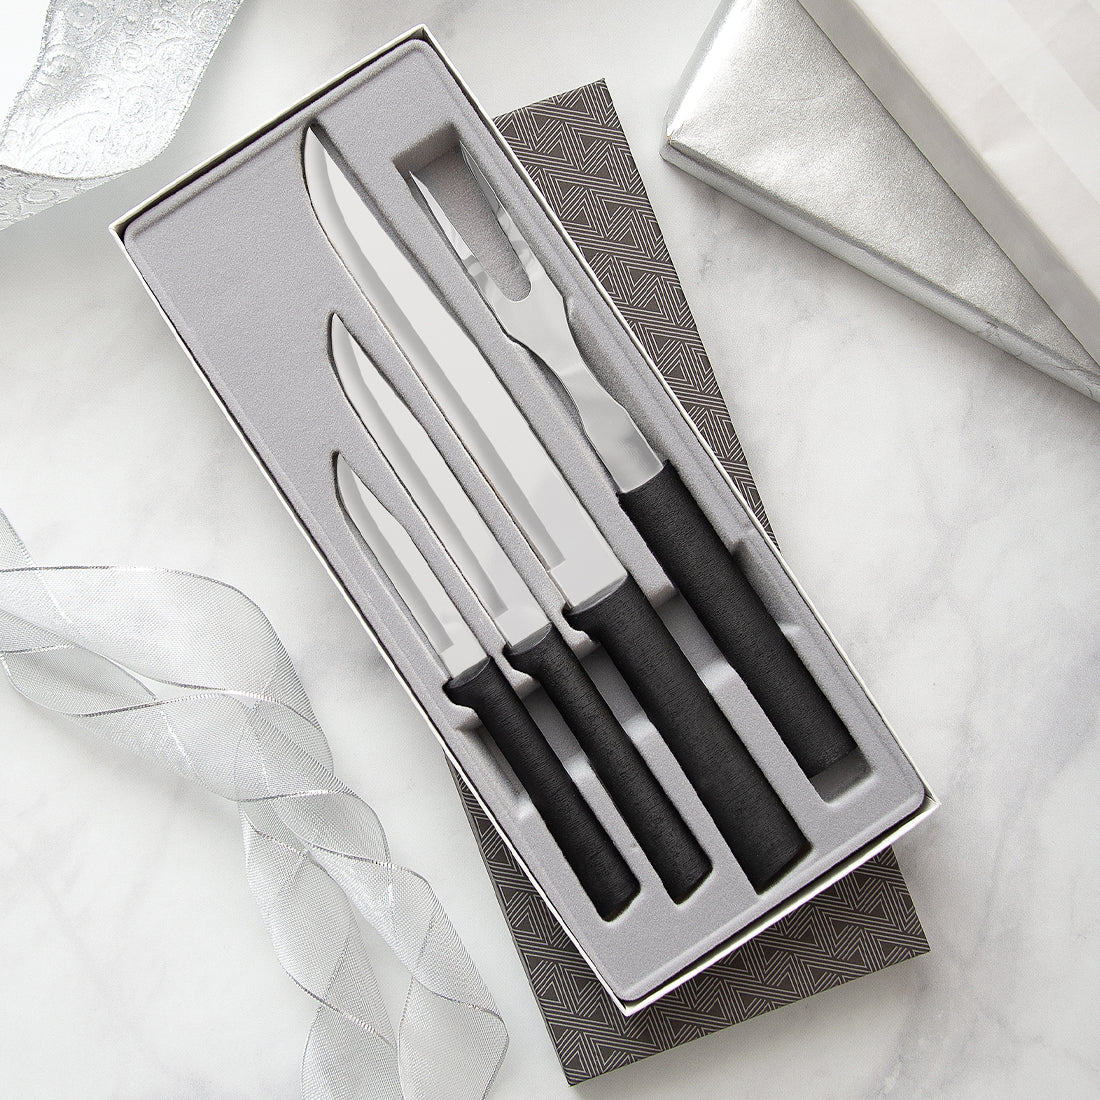 Rada Cutlery Prepare Then Carve Carving Knife Gift Set Stainless Steel Blades with Black Stainless Steel Resin Handles